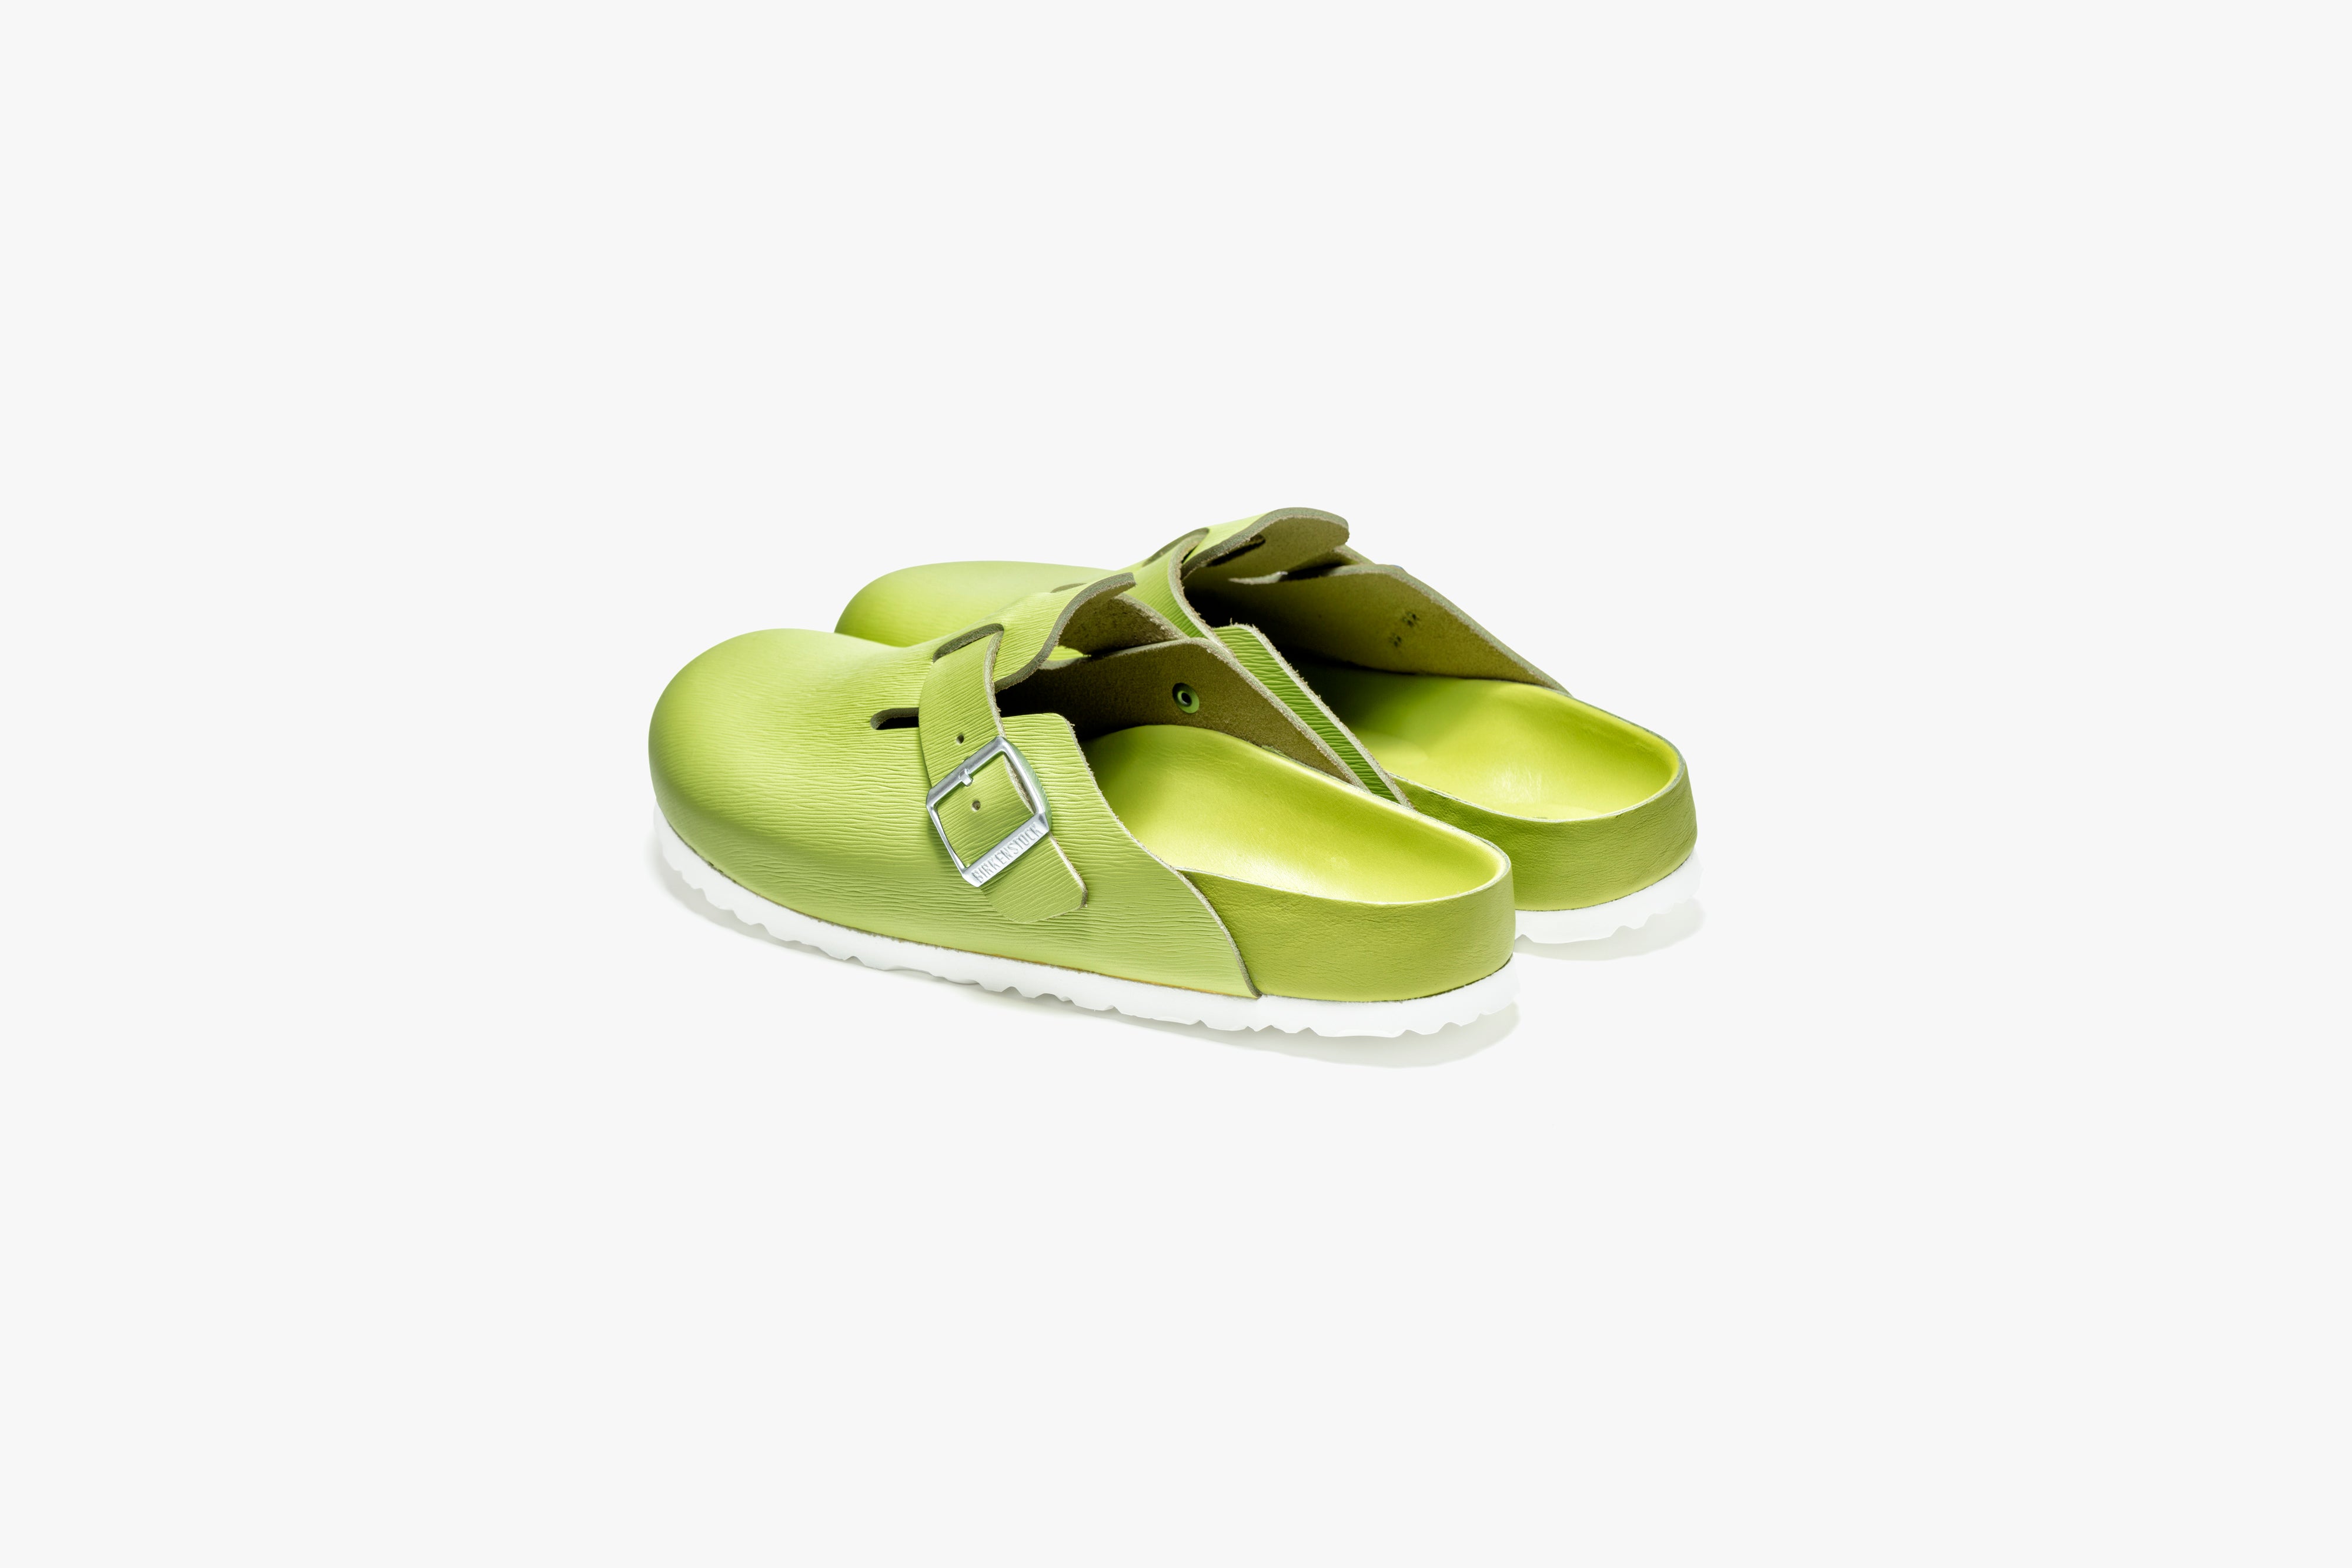 Concepts x Birkenstock Lime Grooved Leather Boston